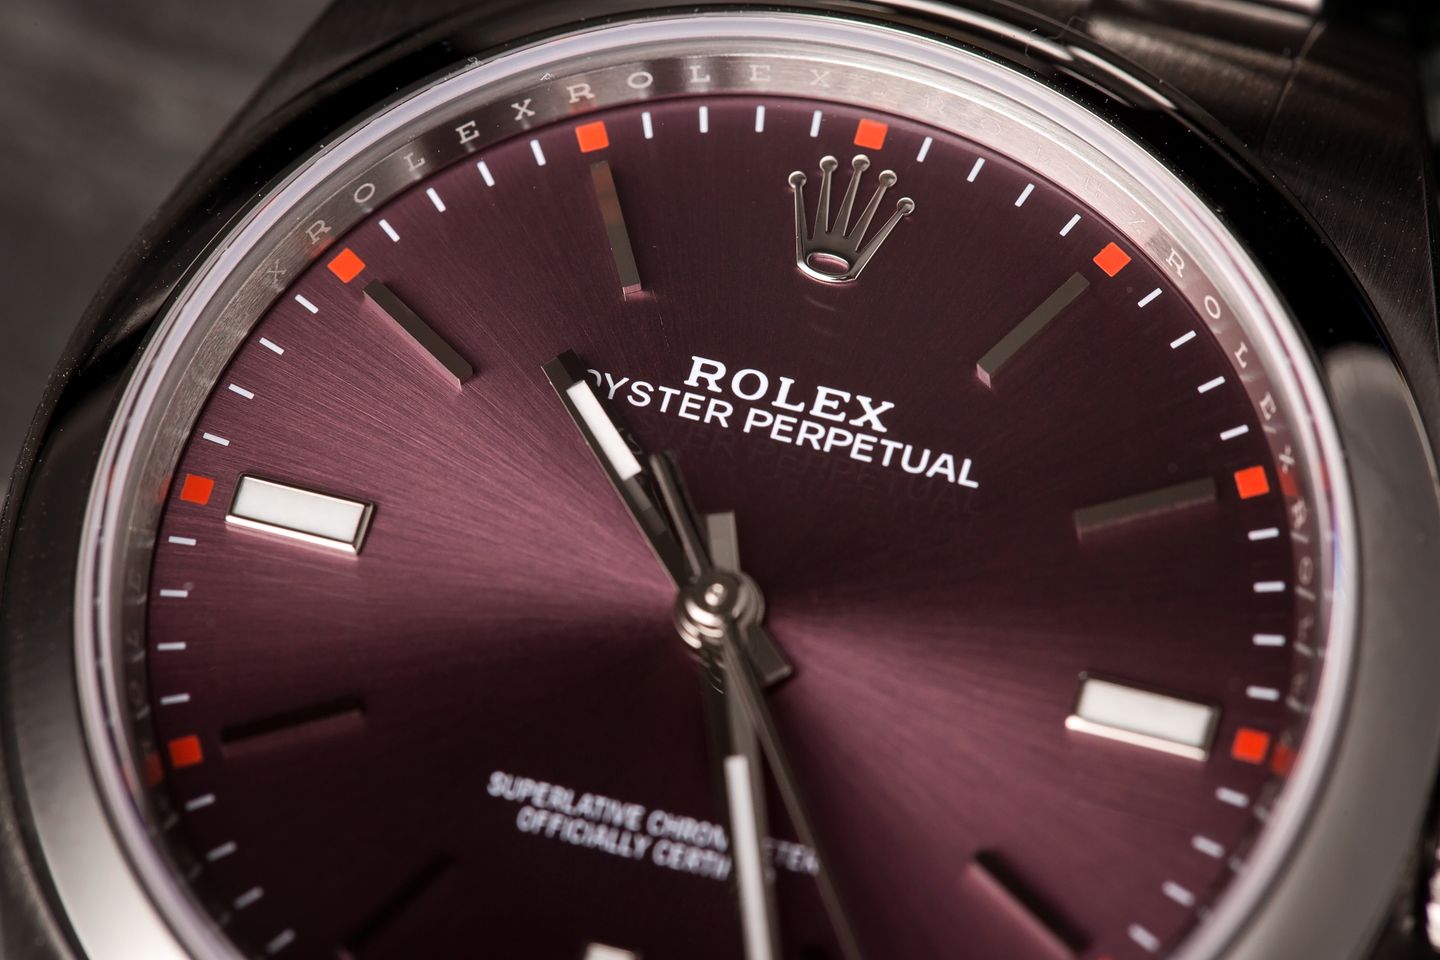 Rolex Oyster Perpetual Interesting Facts for Collectors